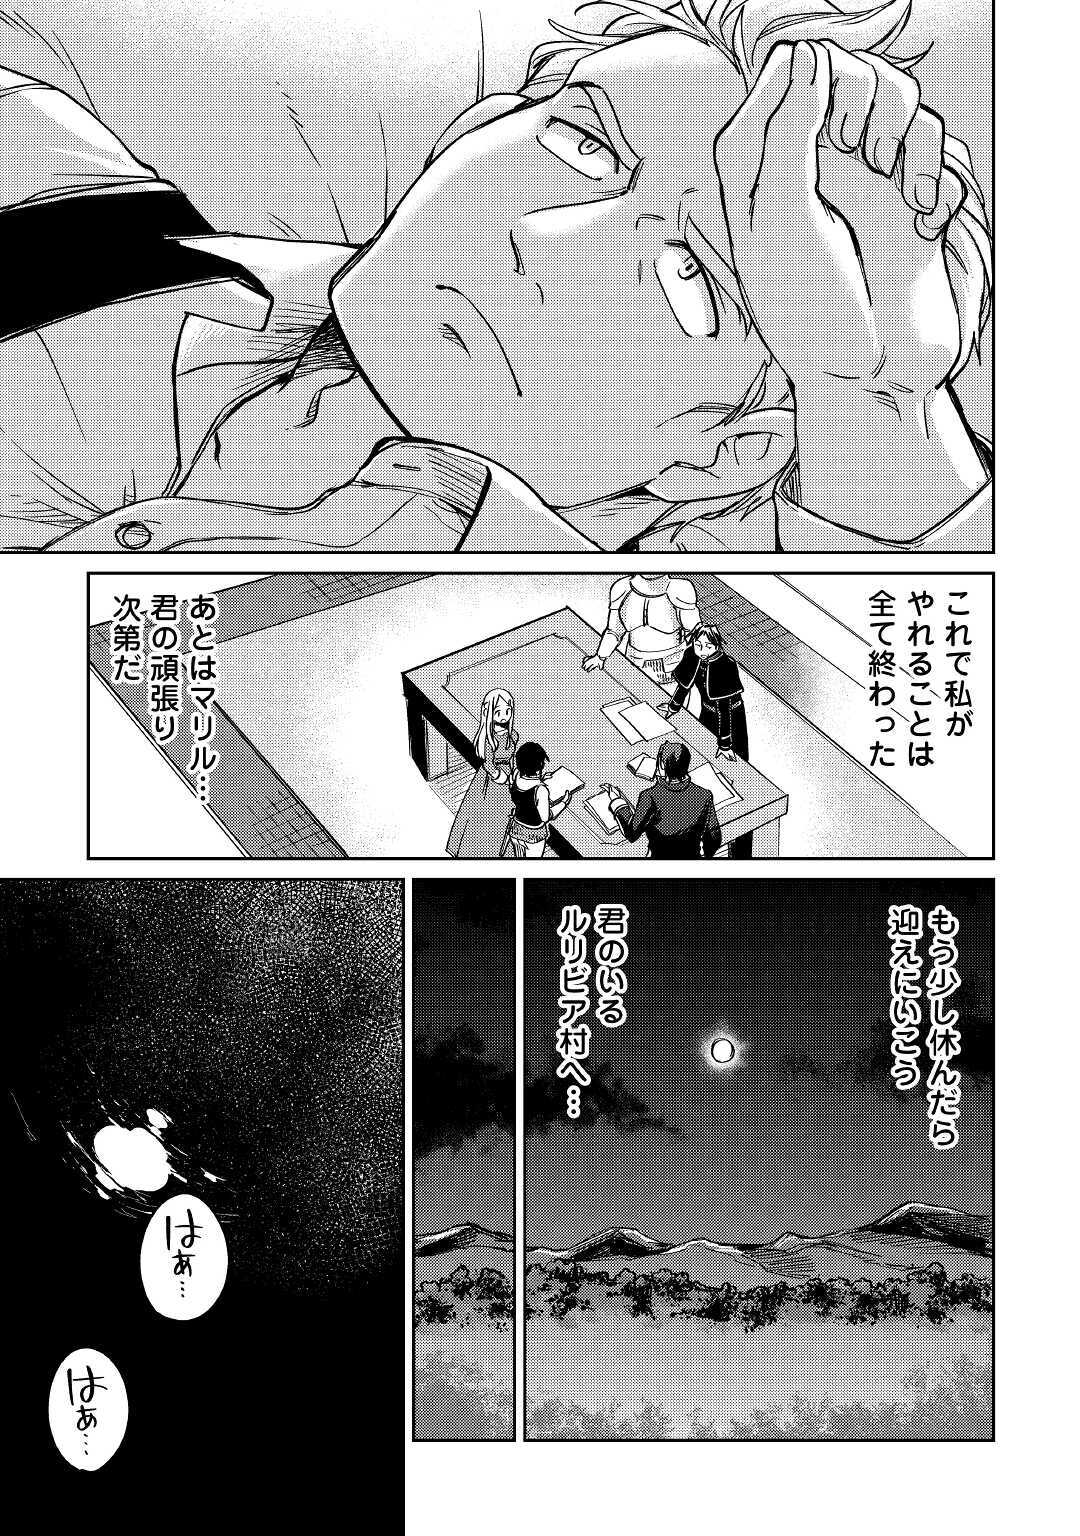 The Former Structural Researcher’s Story of Otherworldly Adventure 第32話 - Page 5